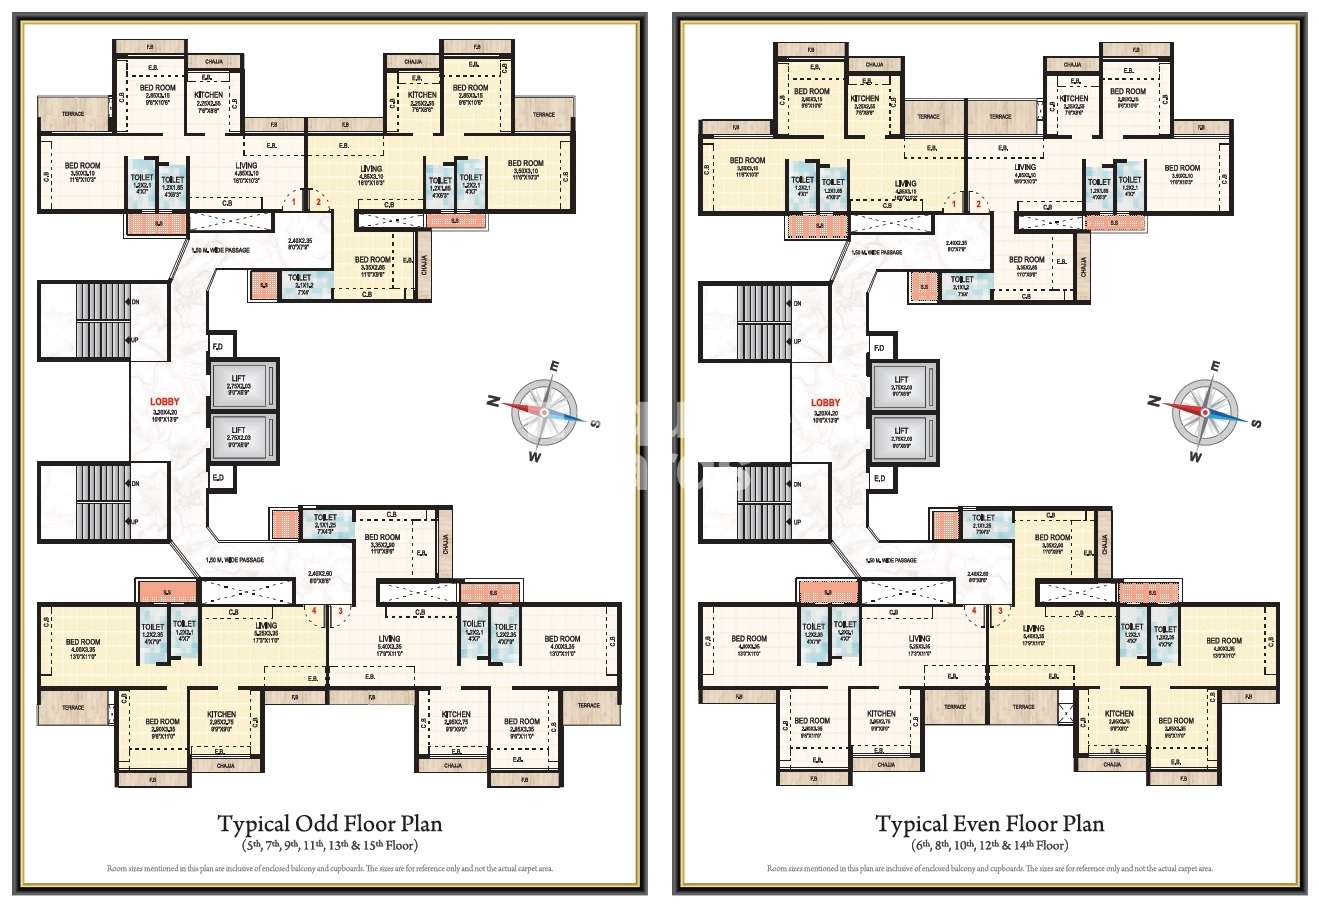 gami asters project floor plans1